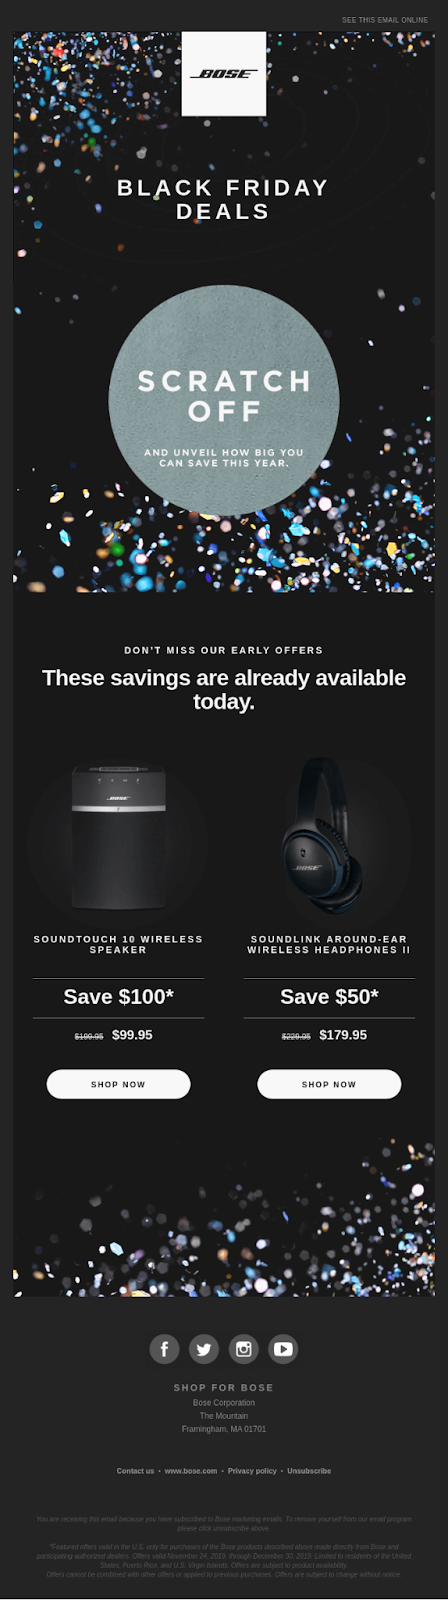 Email template example from Bose.